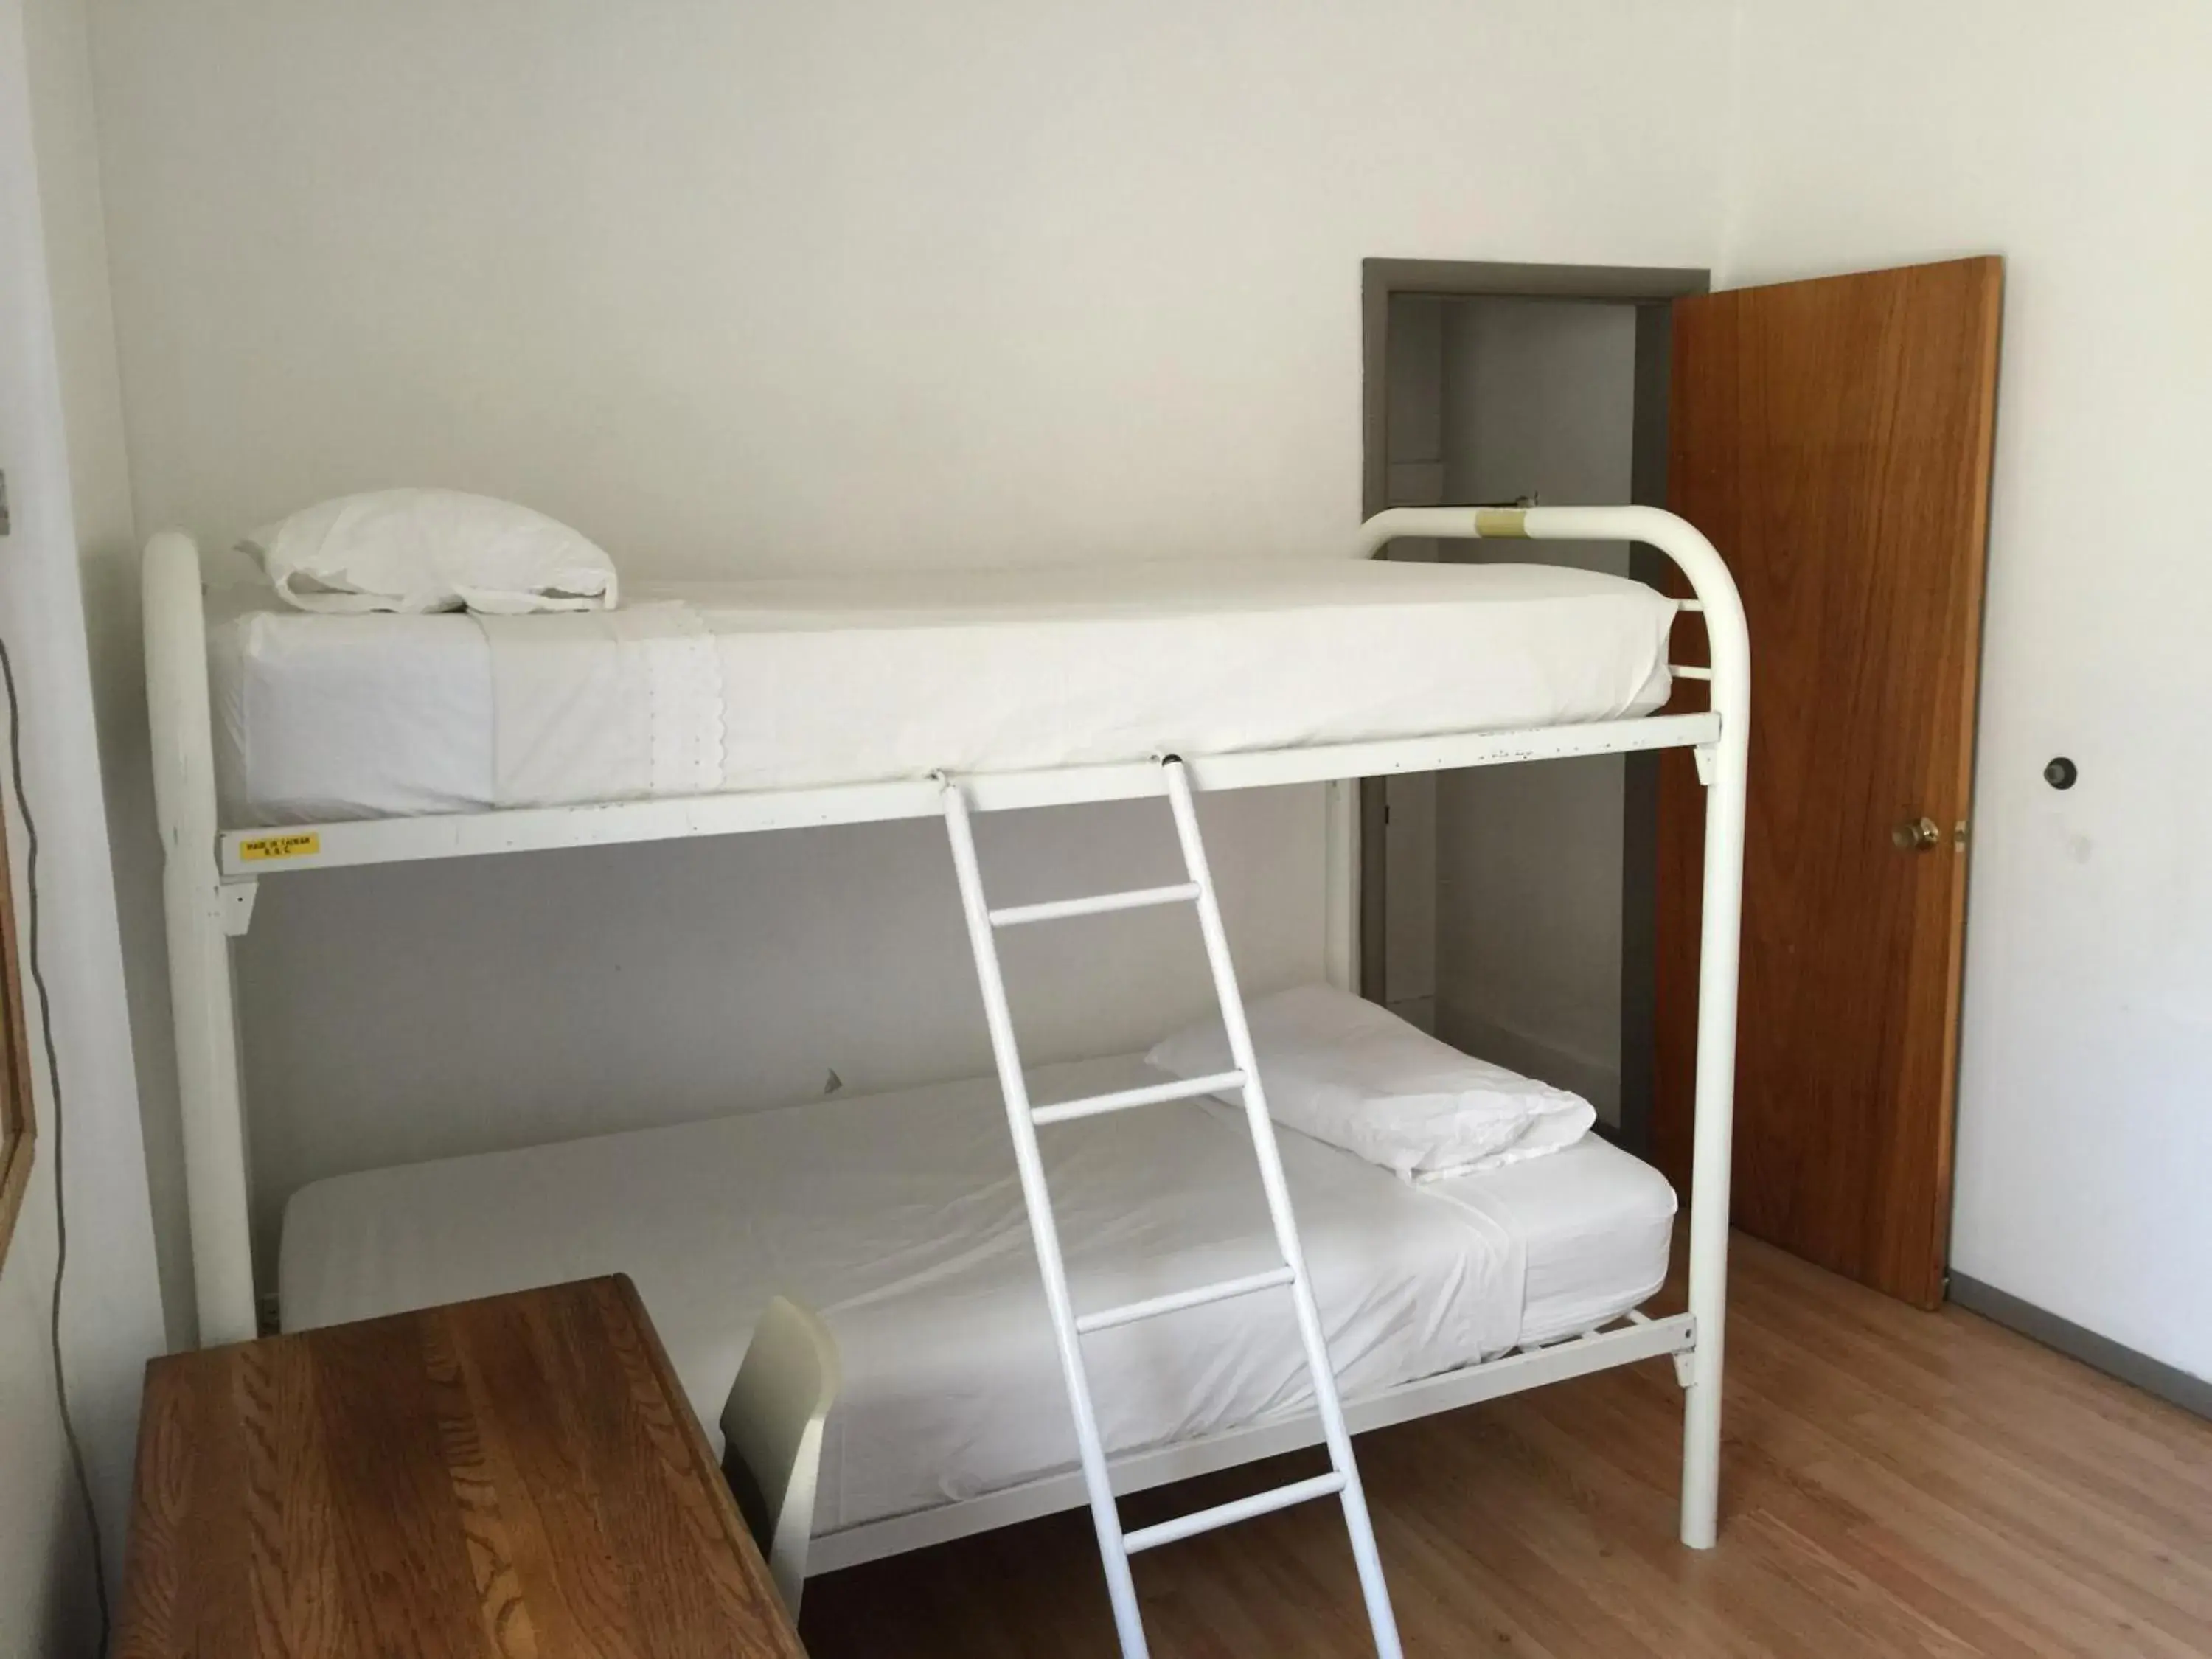 Bed in 4-Bed Male Dormitory Room in Avenues Hostel